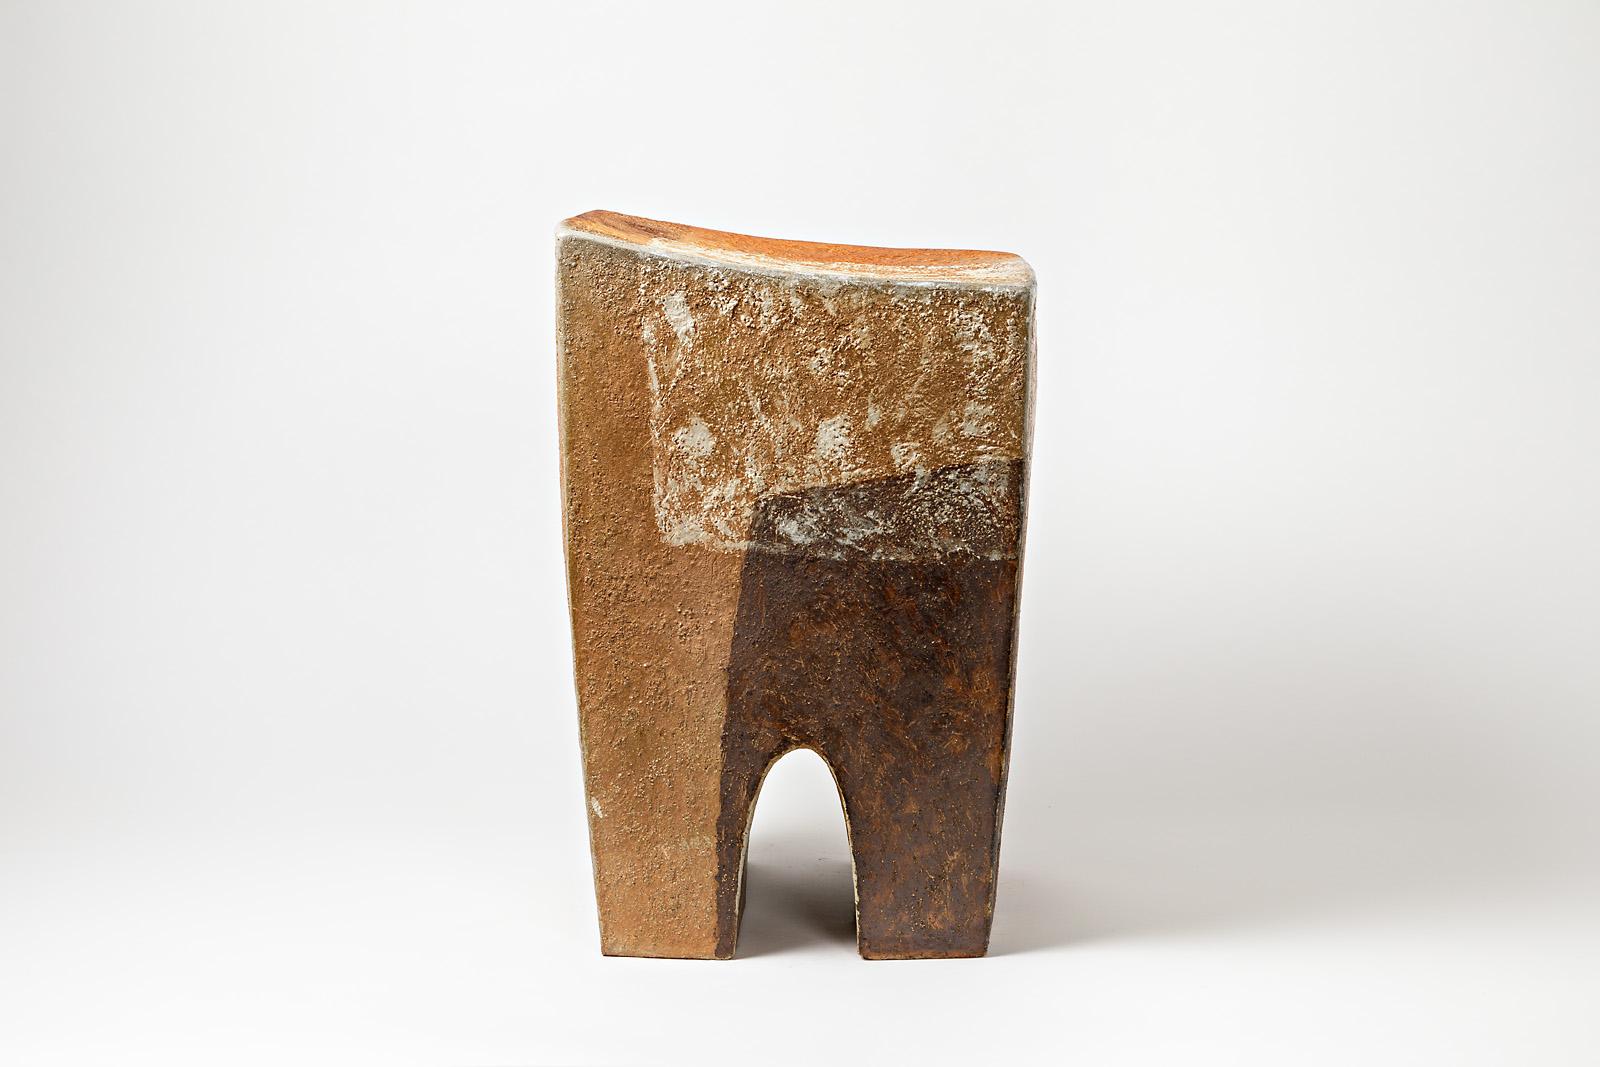 A ceramic stool by Martin Goerg with glazes decoration.
This piece can be put indoor or outdoor.
Perfect original conditions.
2018.
A set of 8 pieces is available.